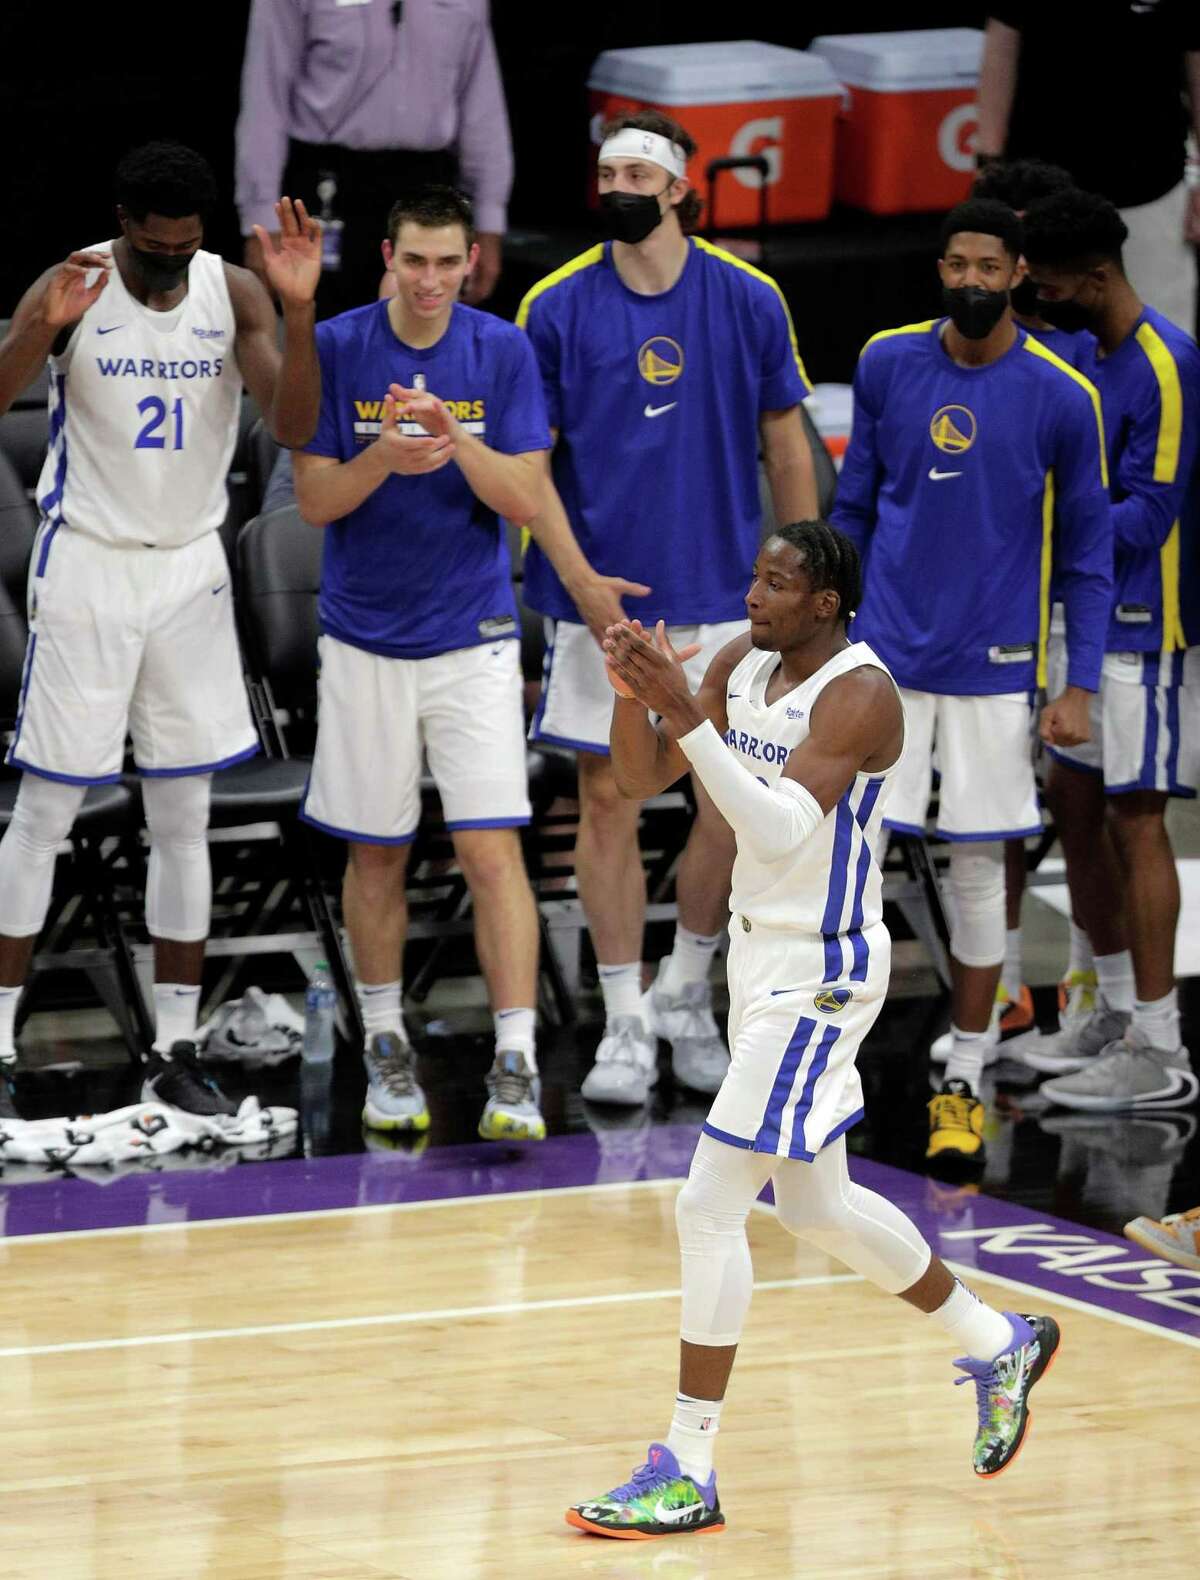 Jonathan Kuminga (00) celebrates after a dunk in the first half as the Golden State Warriors summer league played the Miami Heat Summer league in the 2021 California Classic at Golden 1 Center in Sacramento, Calif., on Wednesday, August 4, 2021.